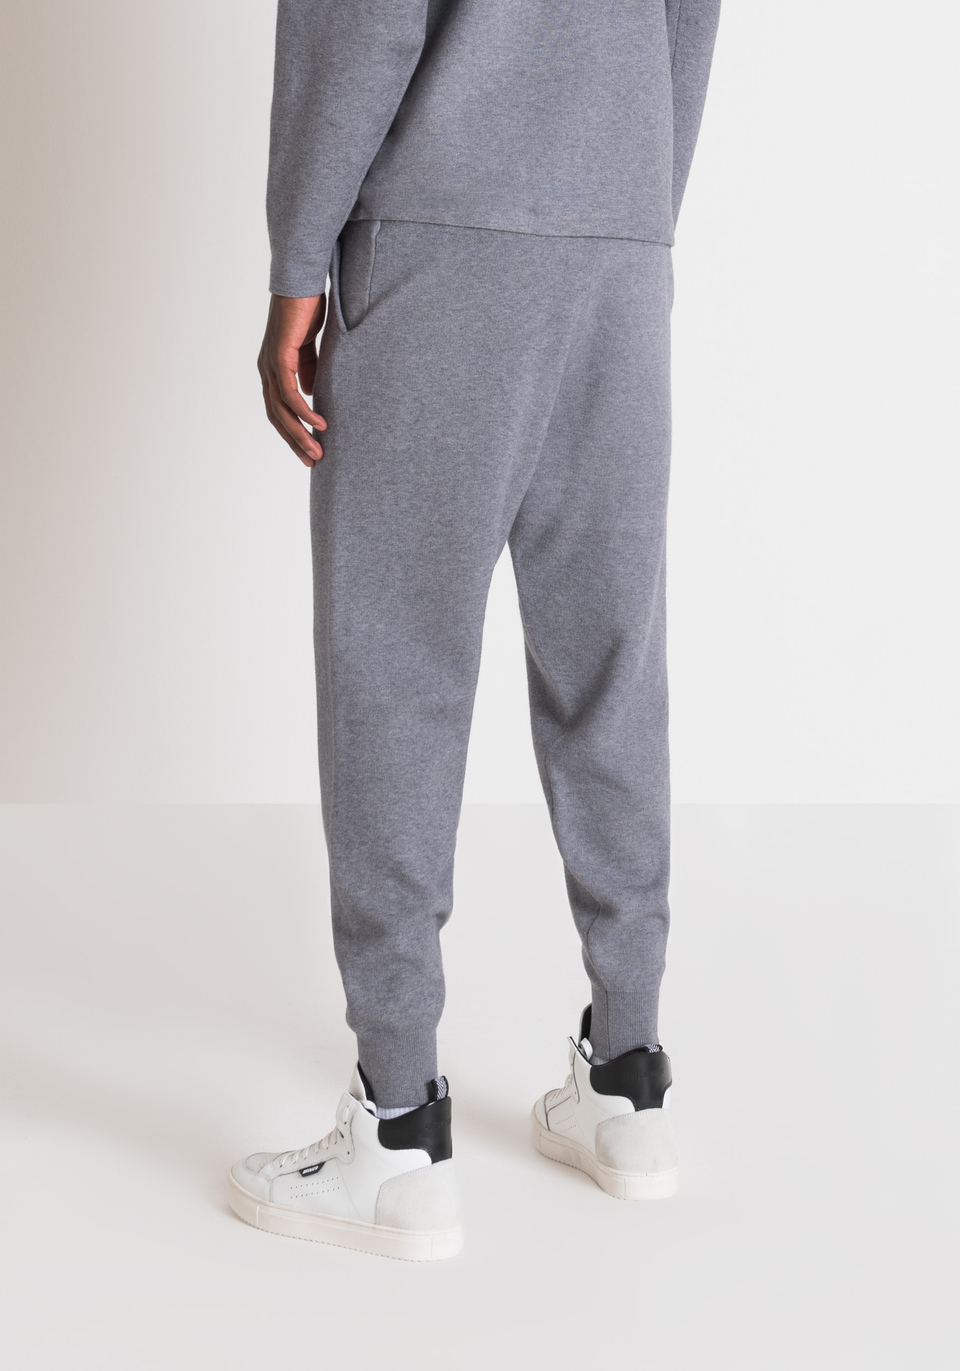 SOFT-TOUCH VISCOSE-BLEND YARN JOGGERS WITH POCKETS - Antony Morato Online Shop